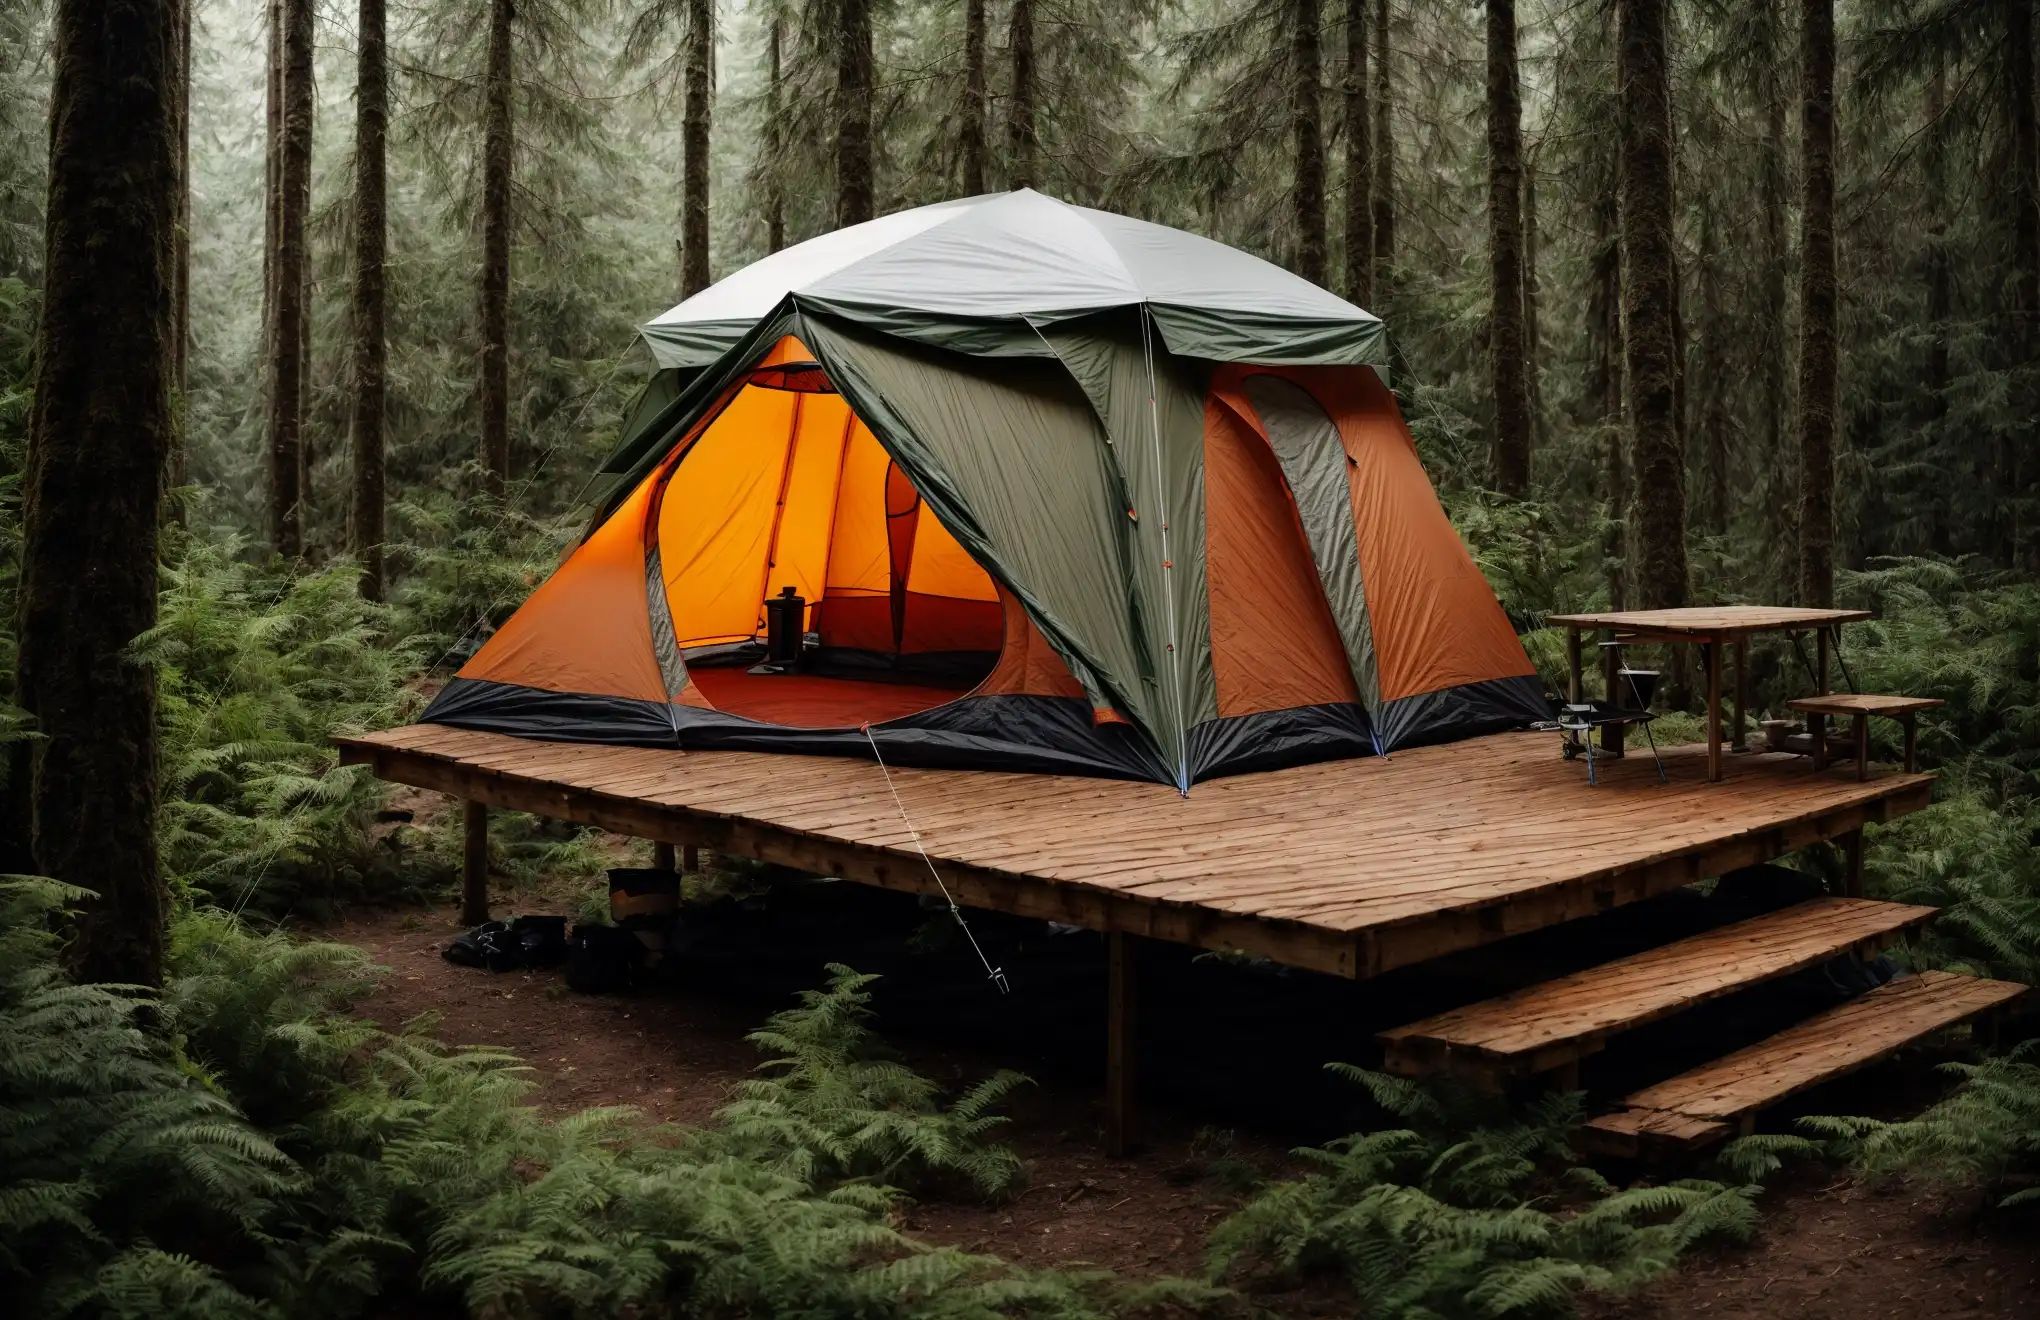 Keep Tent off the Ground